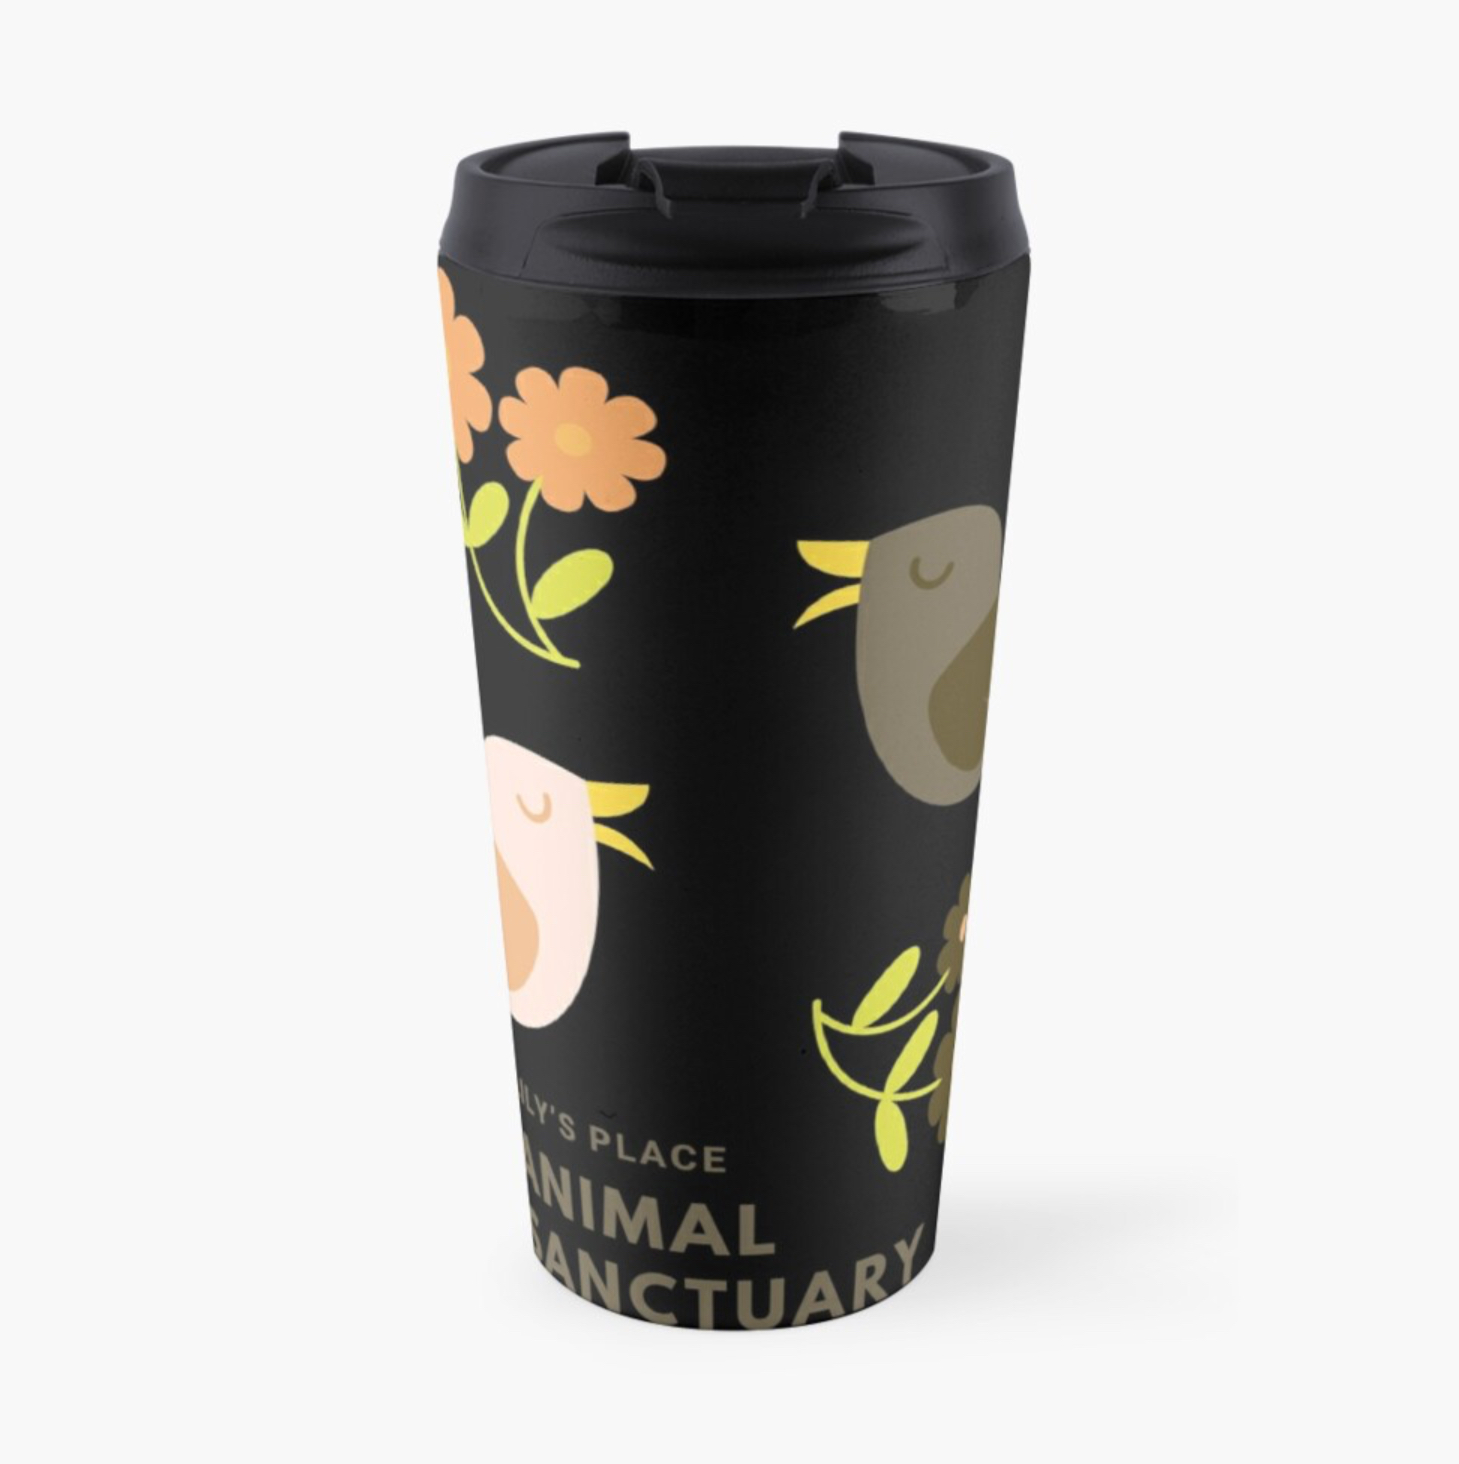 Ducklings of Lily’s Place animal sanctuary. Cute duck travel mug for coffee or tea